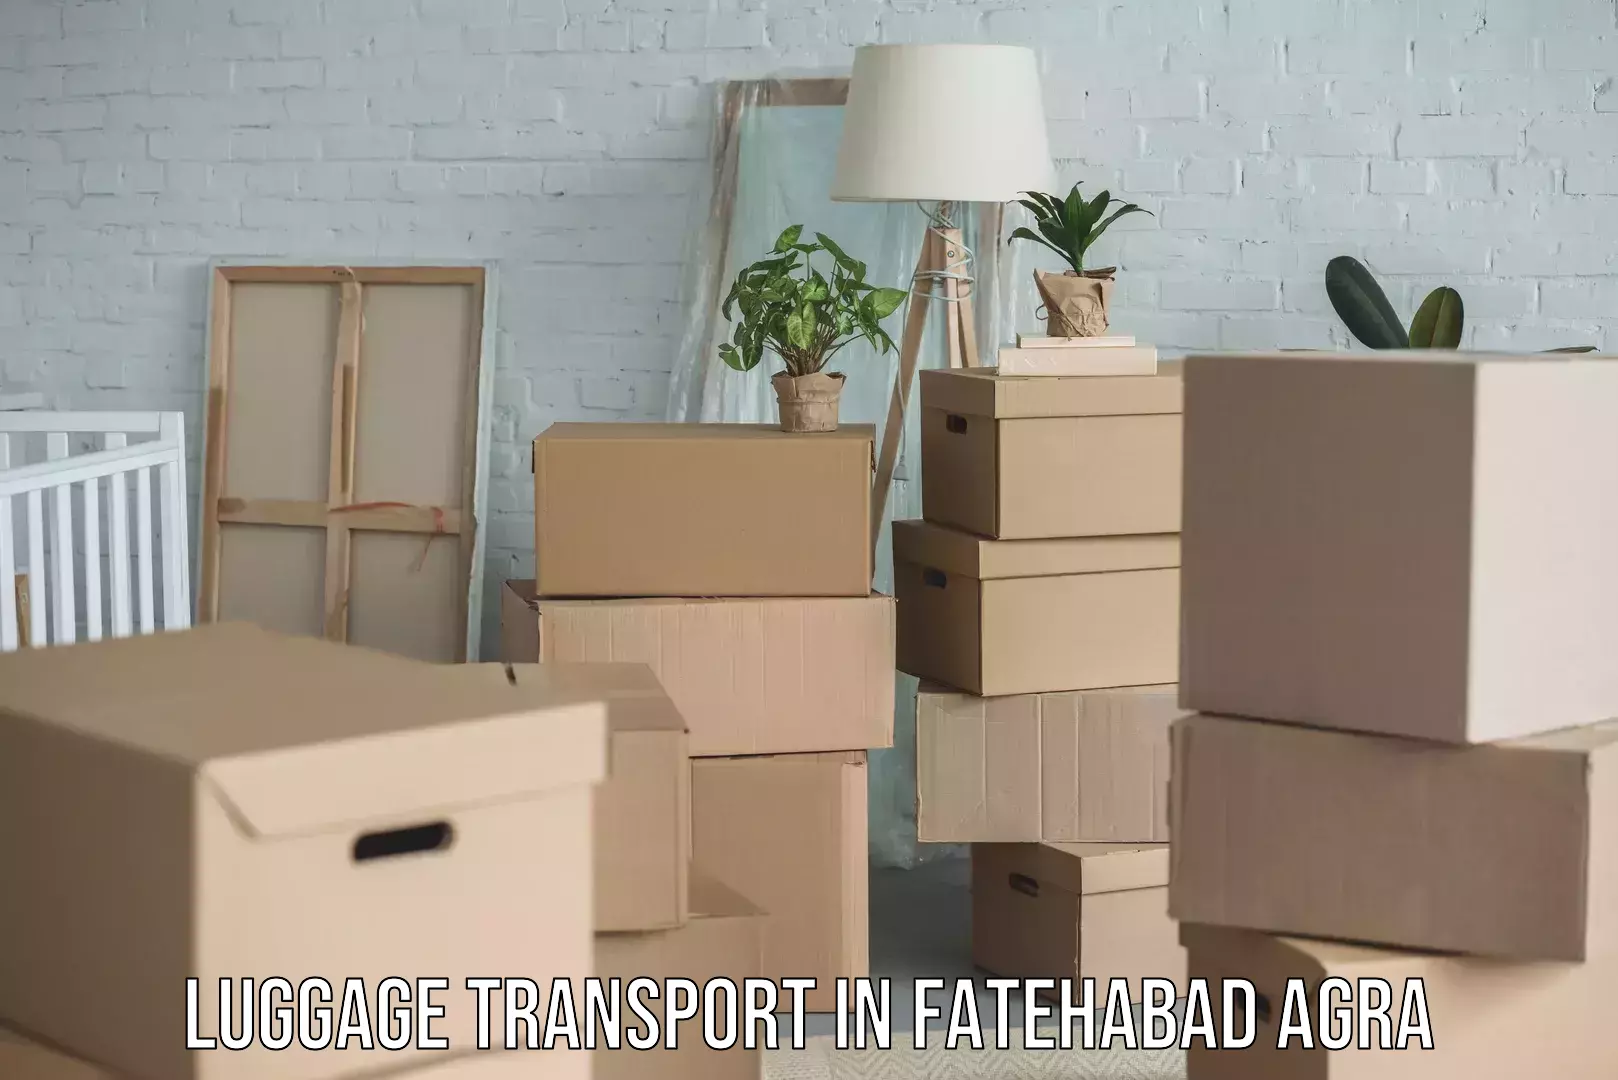 Doorstep luggage collection in Fatehabad Agra